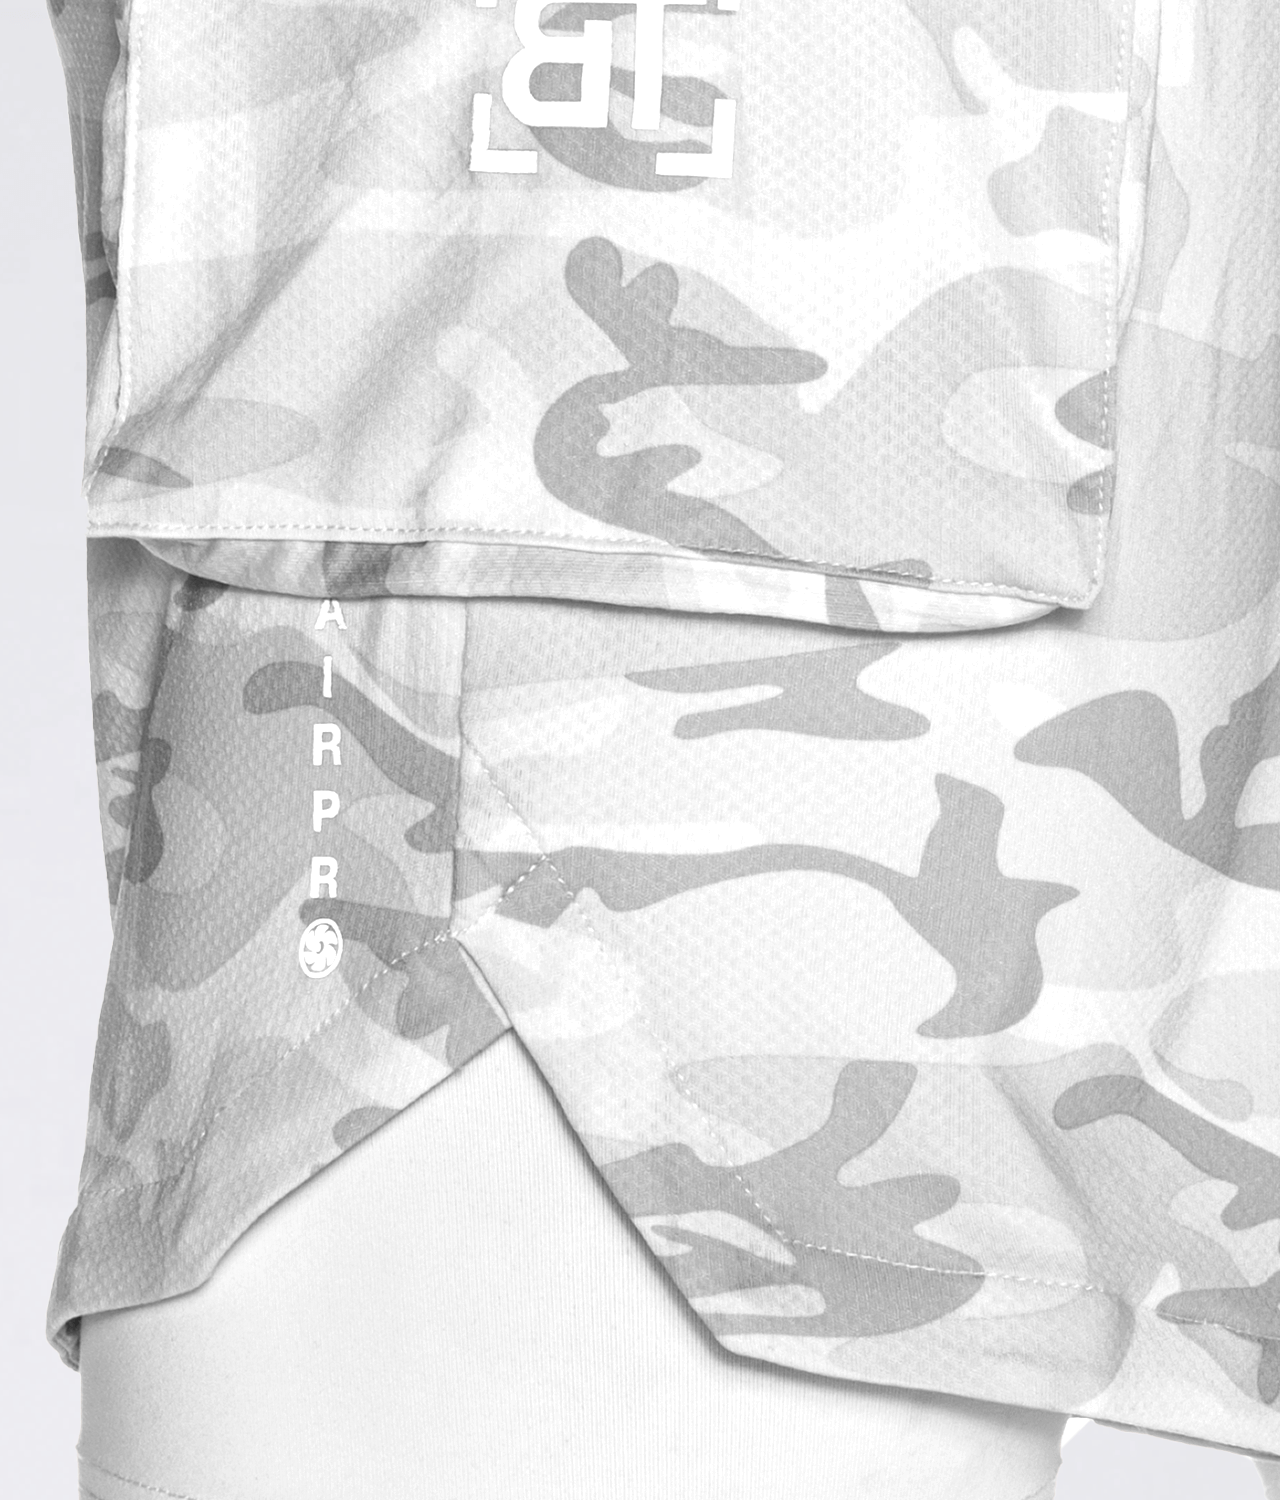 3600. Air Pro 2 in 1 5 Cargo Liner Shorts White Camo